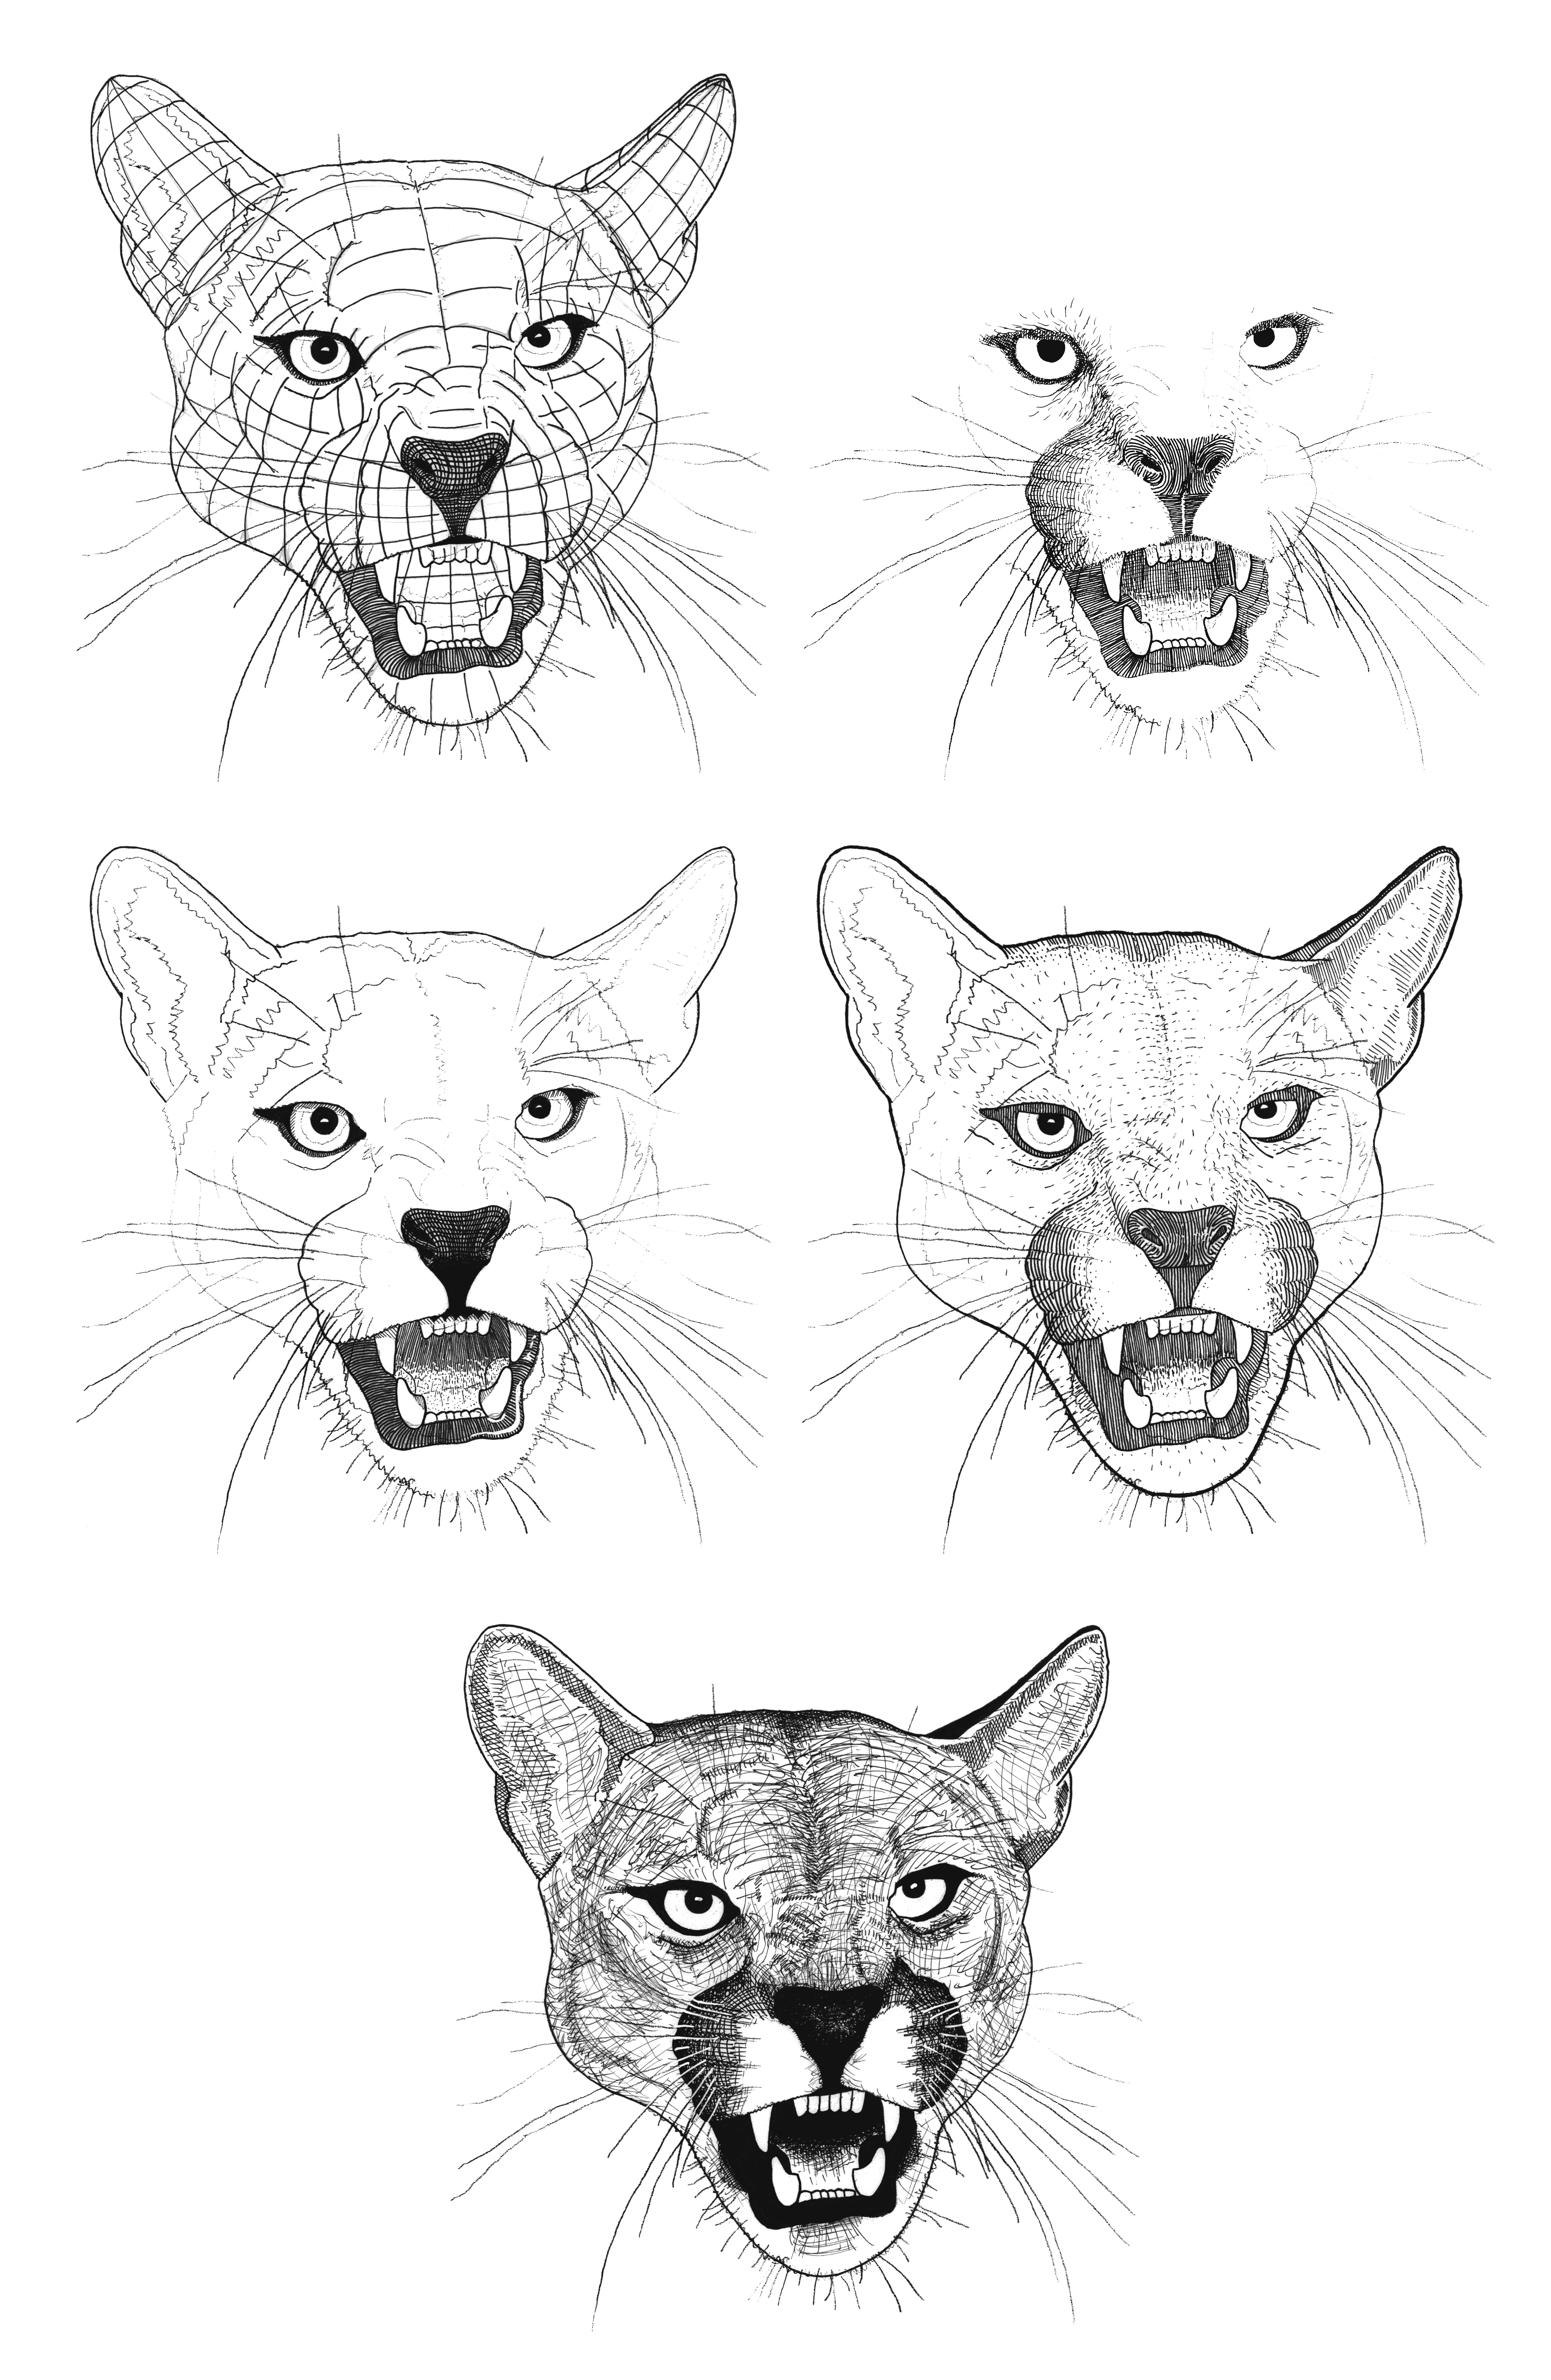 curtis warner recommends How To Draw A Cougar